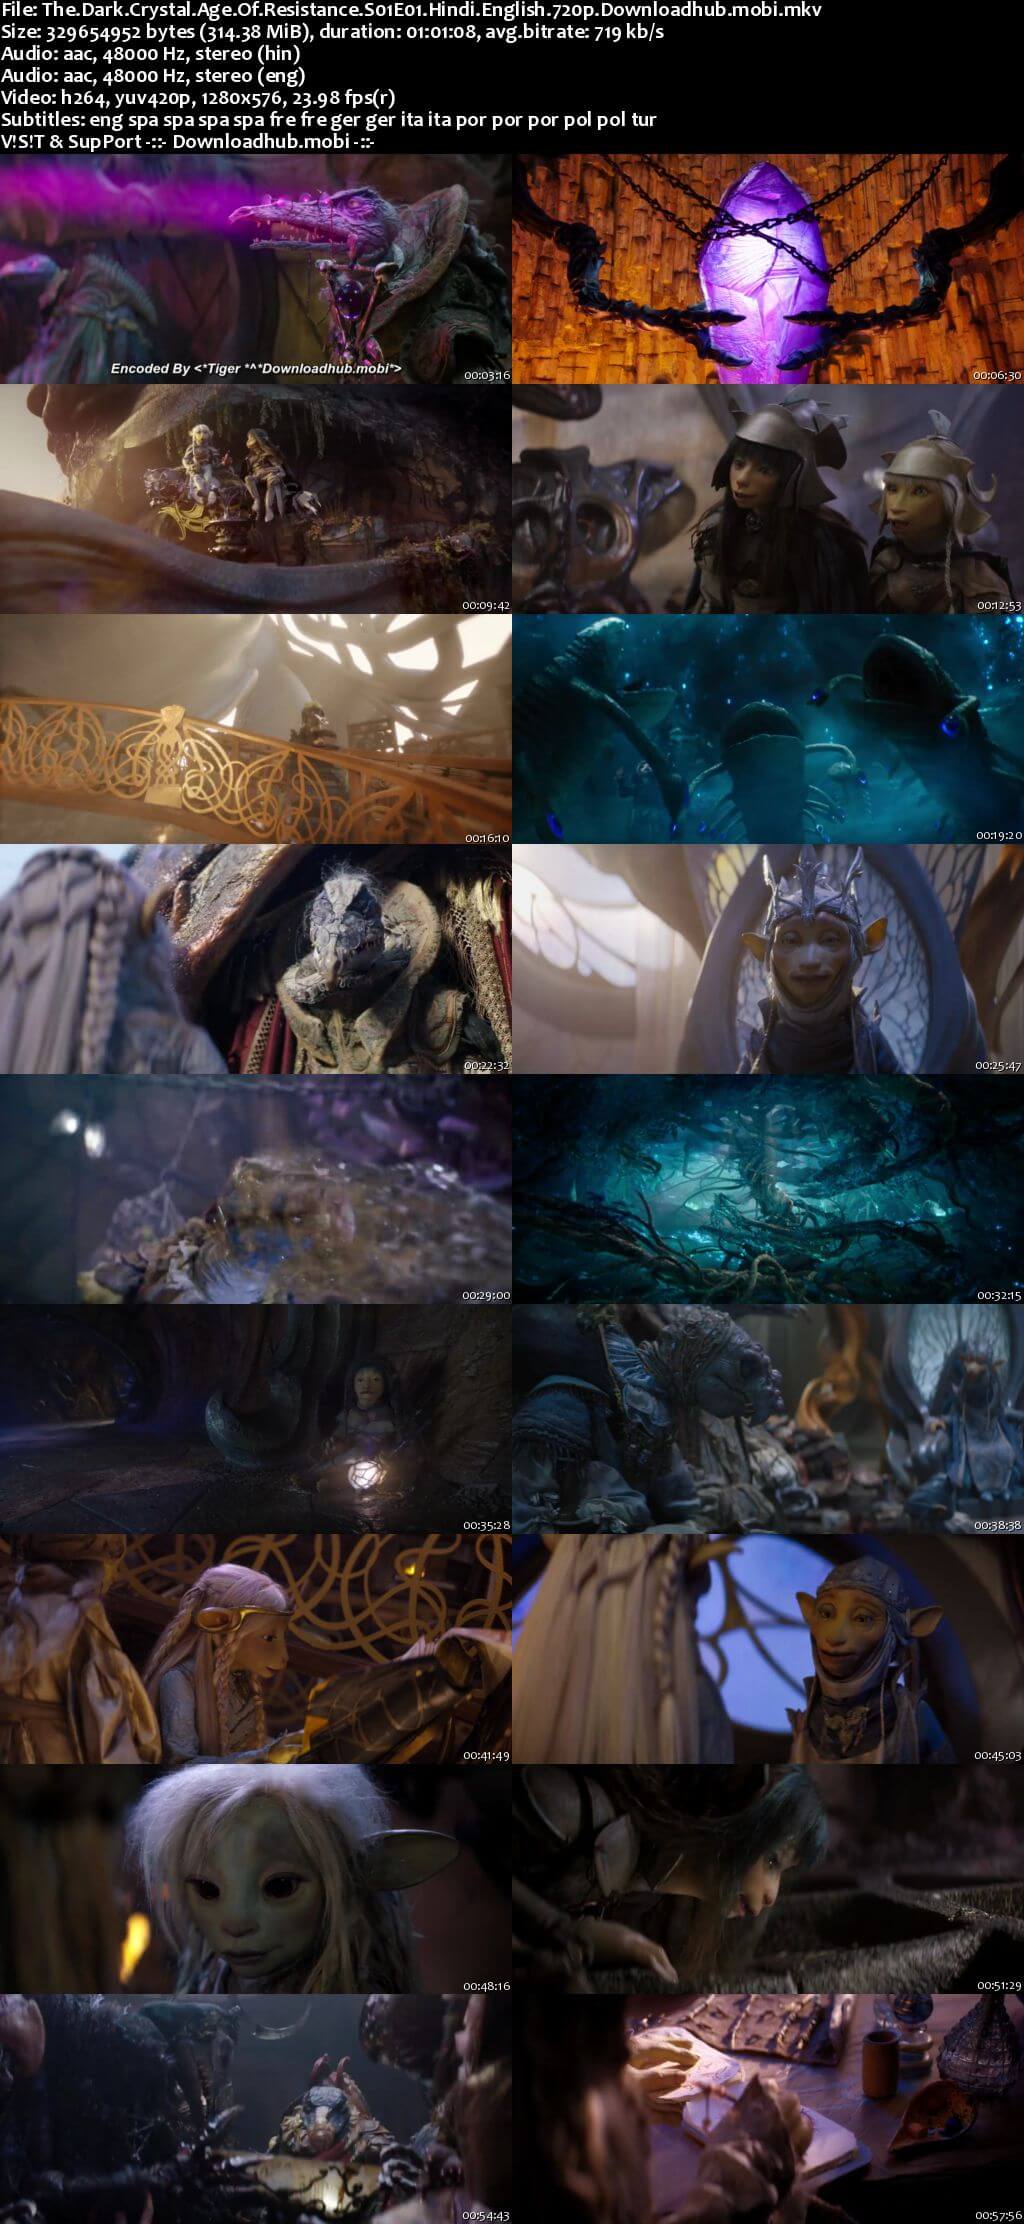 The Dark Crystal Age of Resistance S01 Complete Hindi Dual Audio 720p Web-DL MSubs